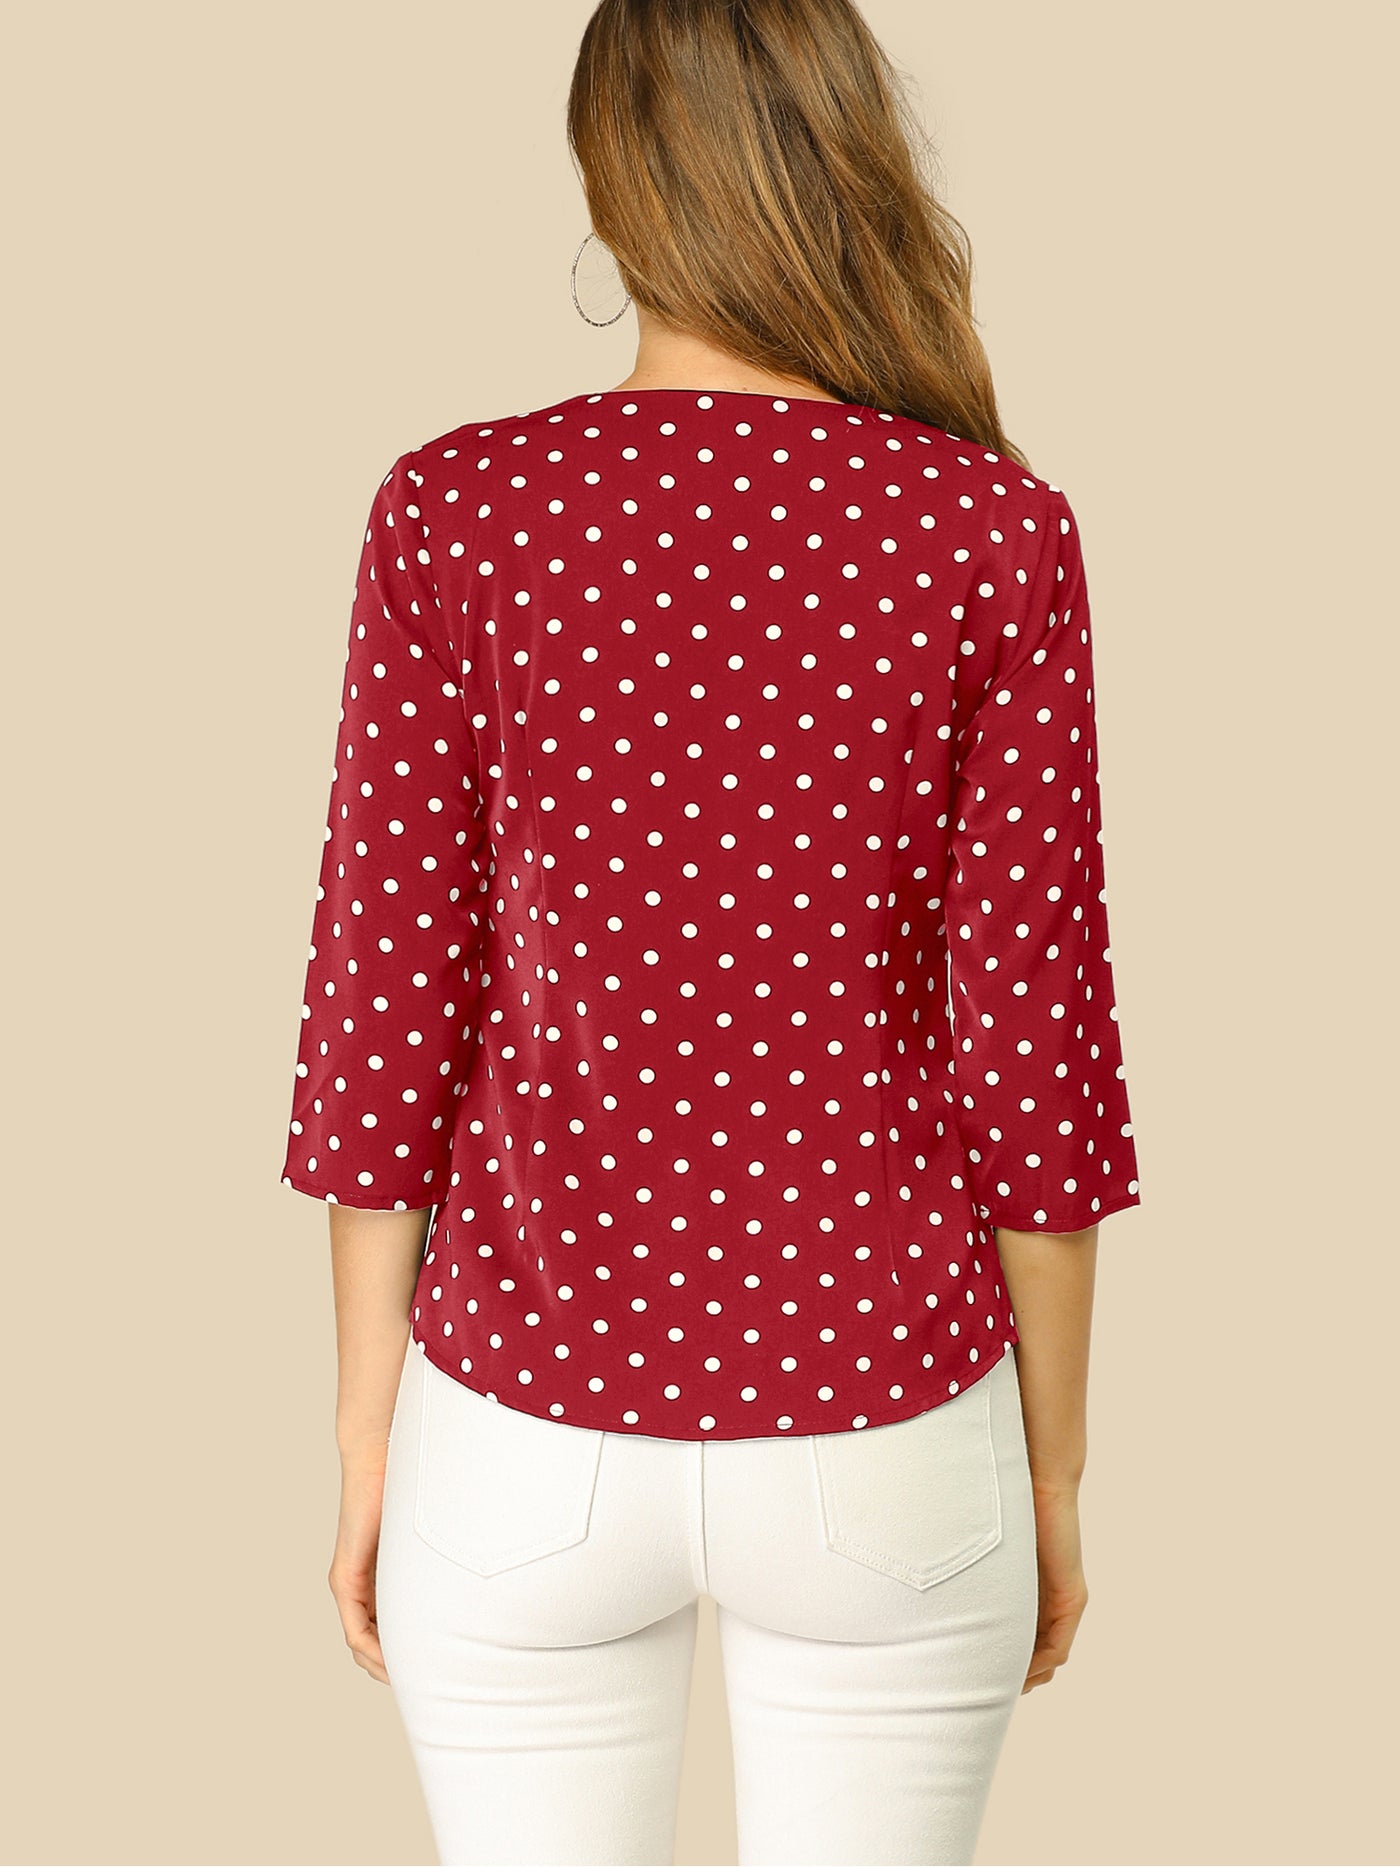 Allegra K Polka Dots 3/4 Sleeve Button Front Vintage Office Blouse Top